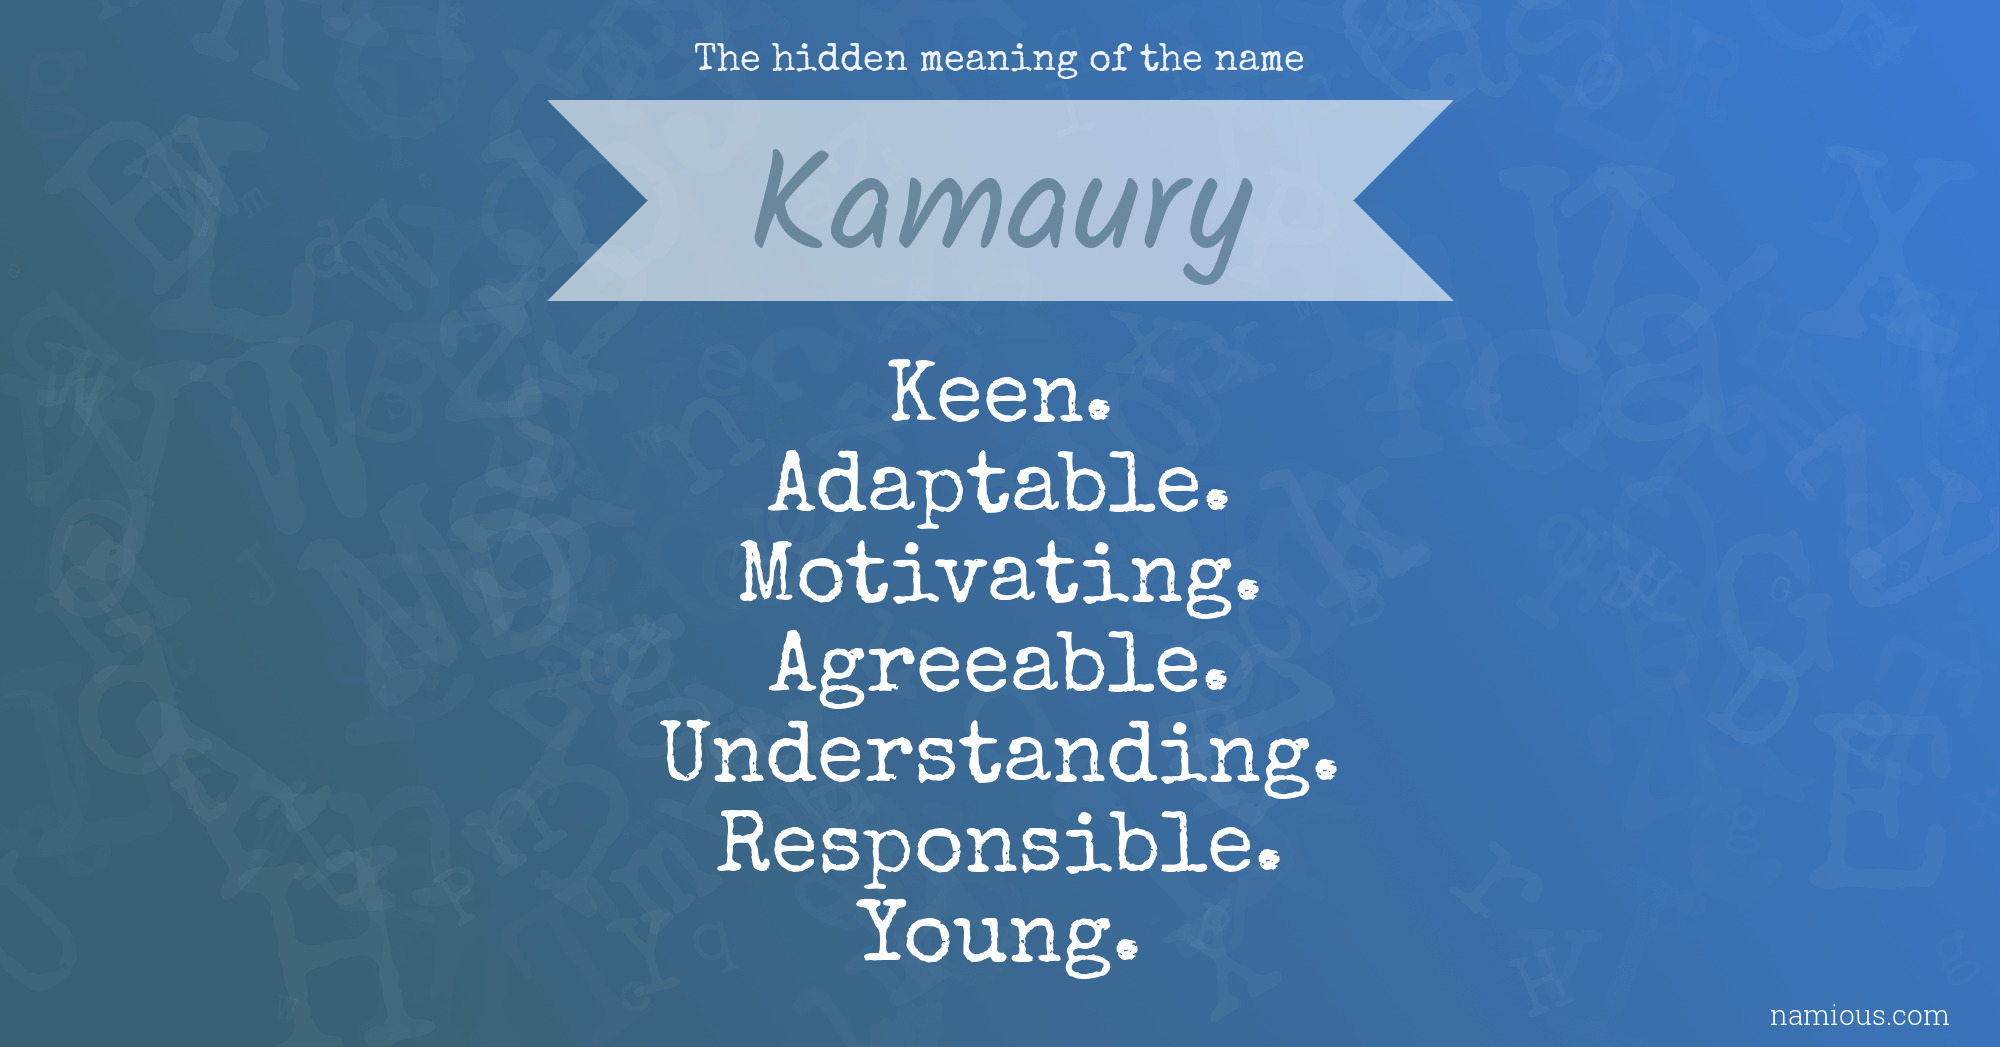 The hidden meaning of the name Kamaury